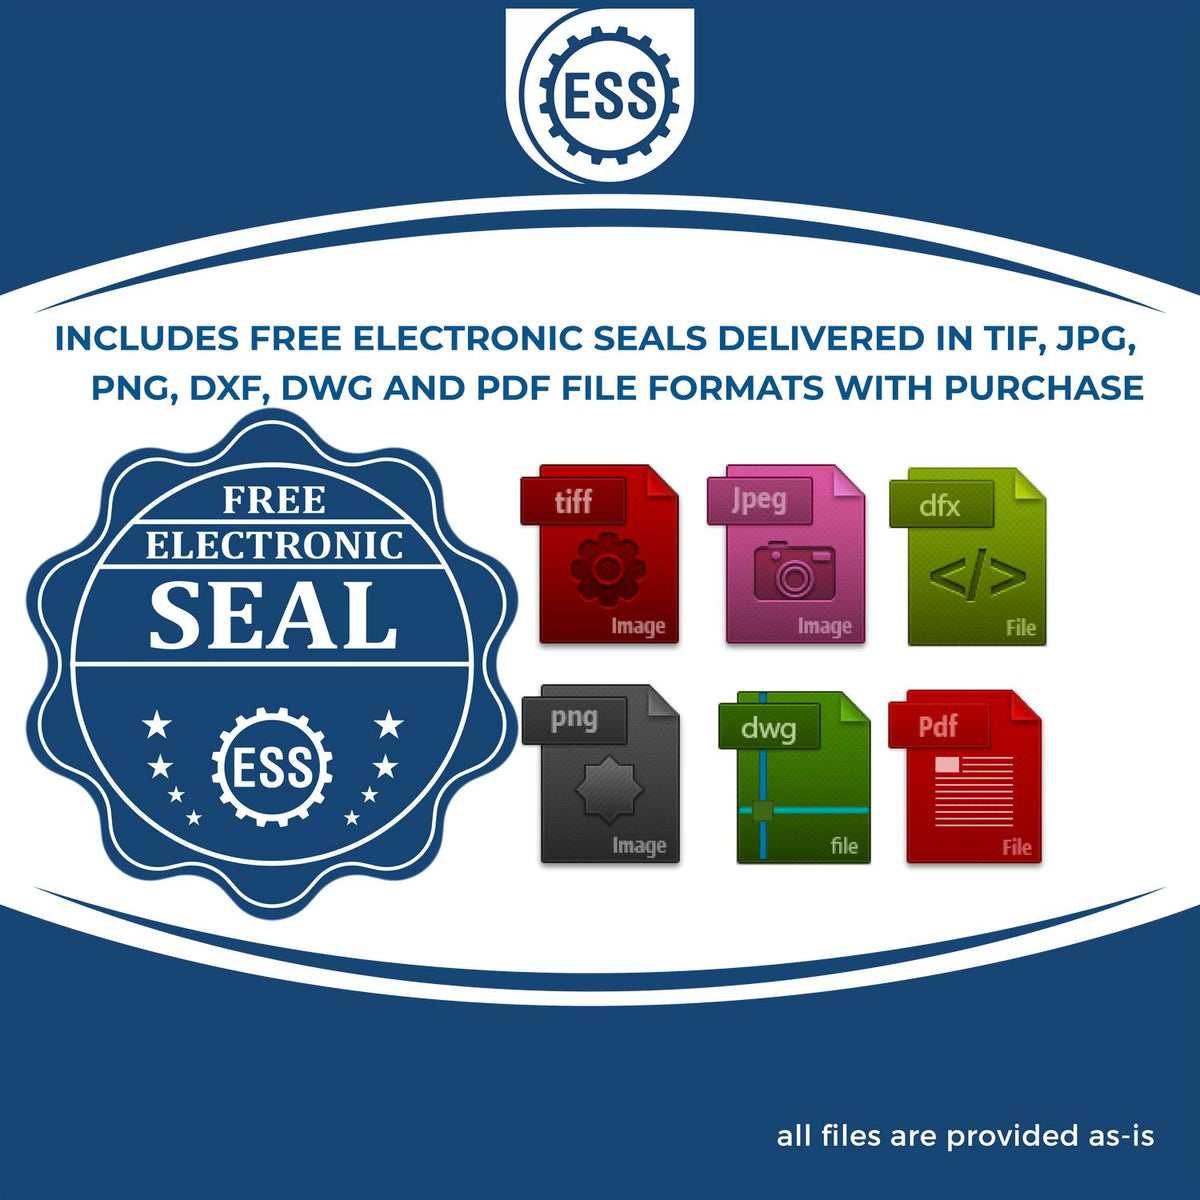 An infographic for the free electronic seal for the Gift Virginia Geologist Seal illustrating the different file type icons such as DXF, DWG, TIF, JPG and PNG.